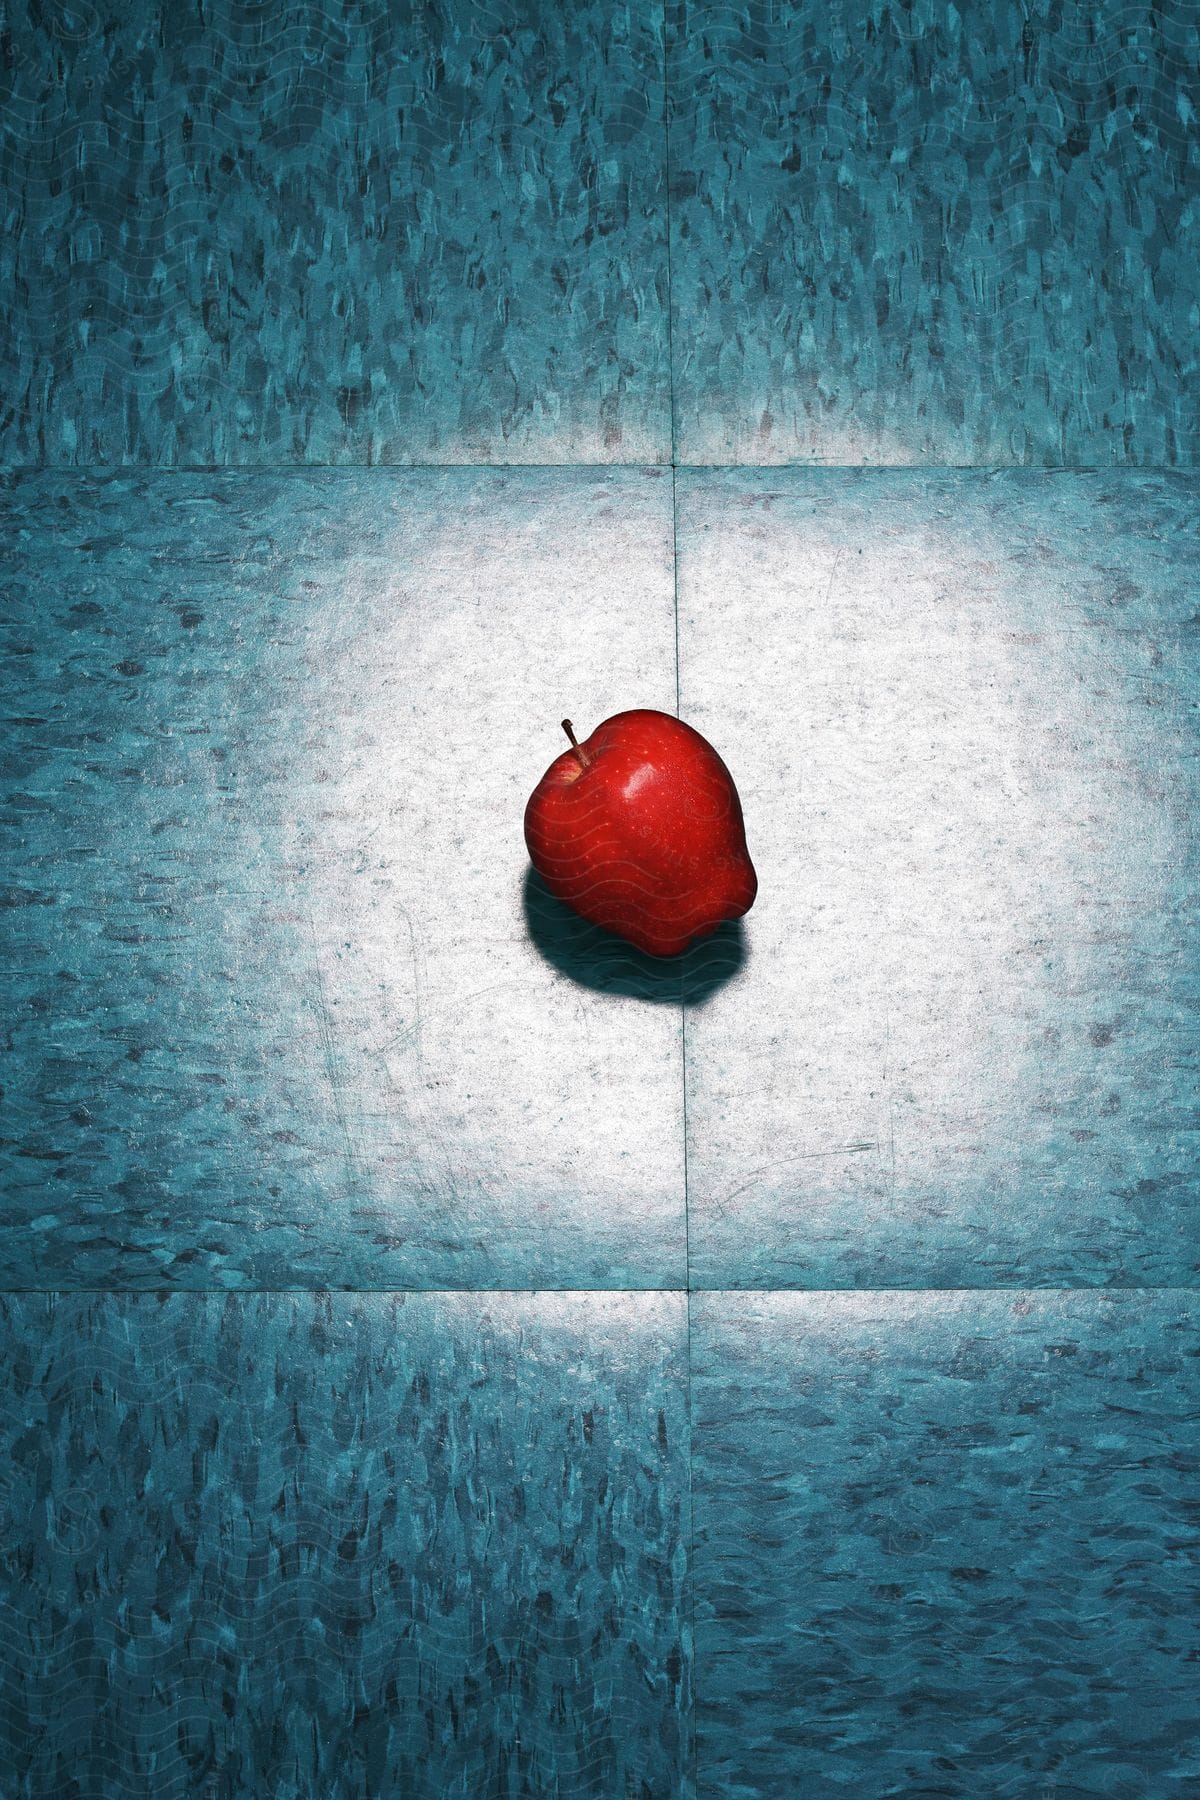 A red apple on the floor